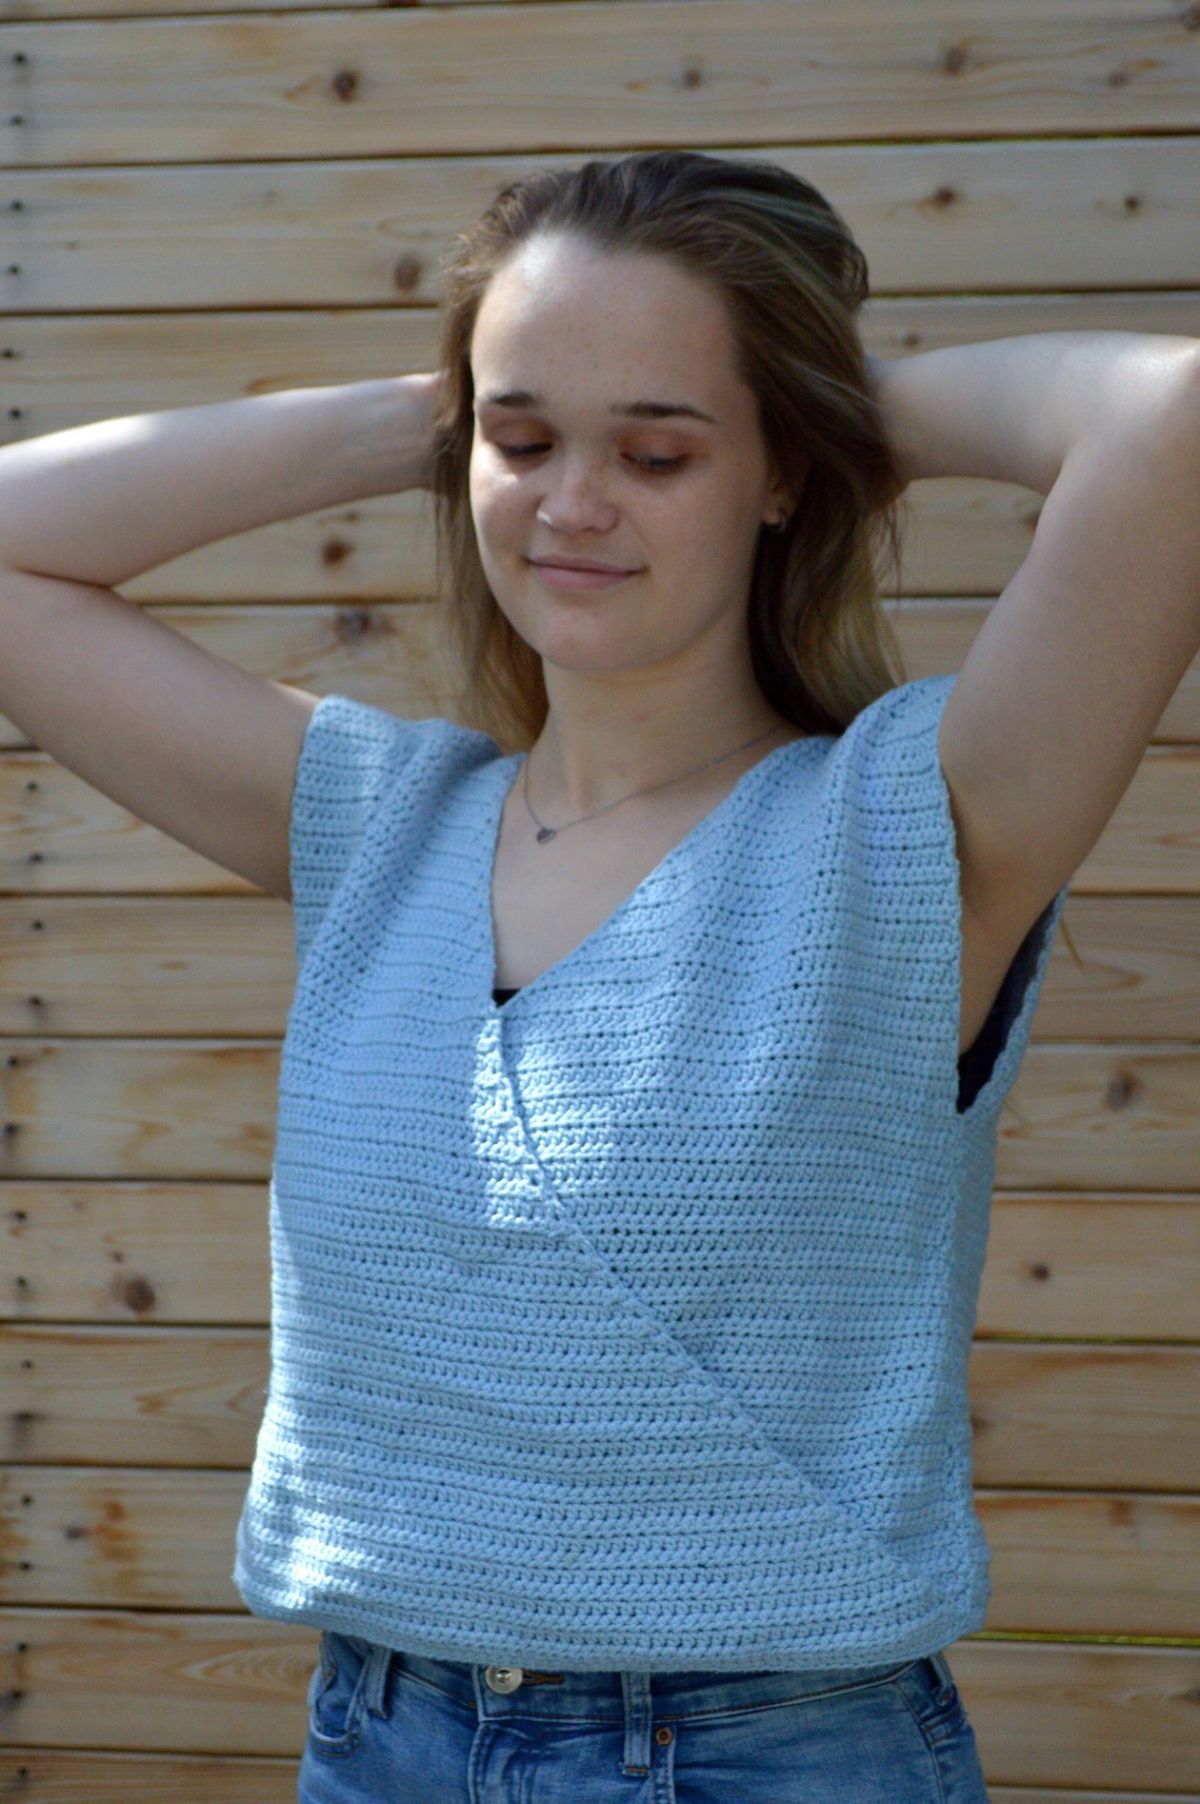 A young brunette woman with her hands behind her head in a v-neck crochet blue vest against a wooden background.